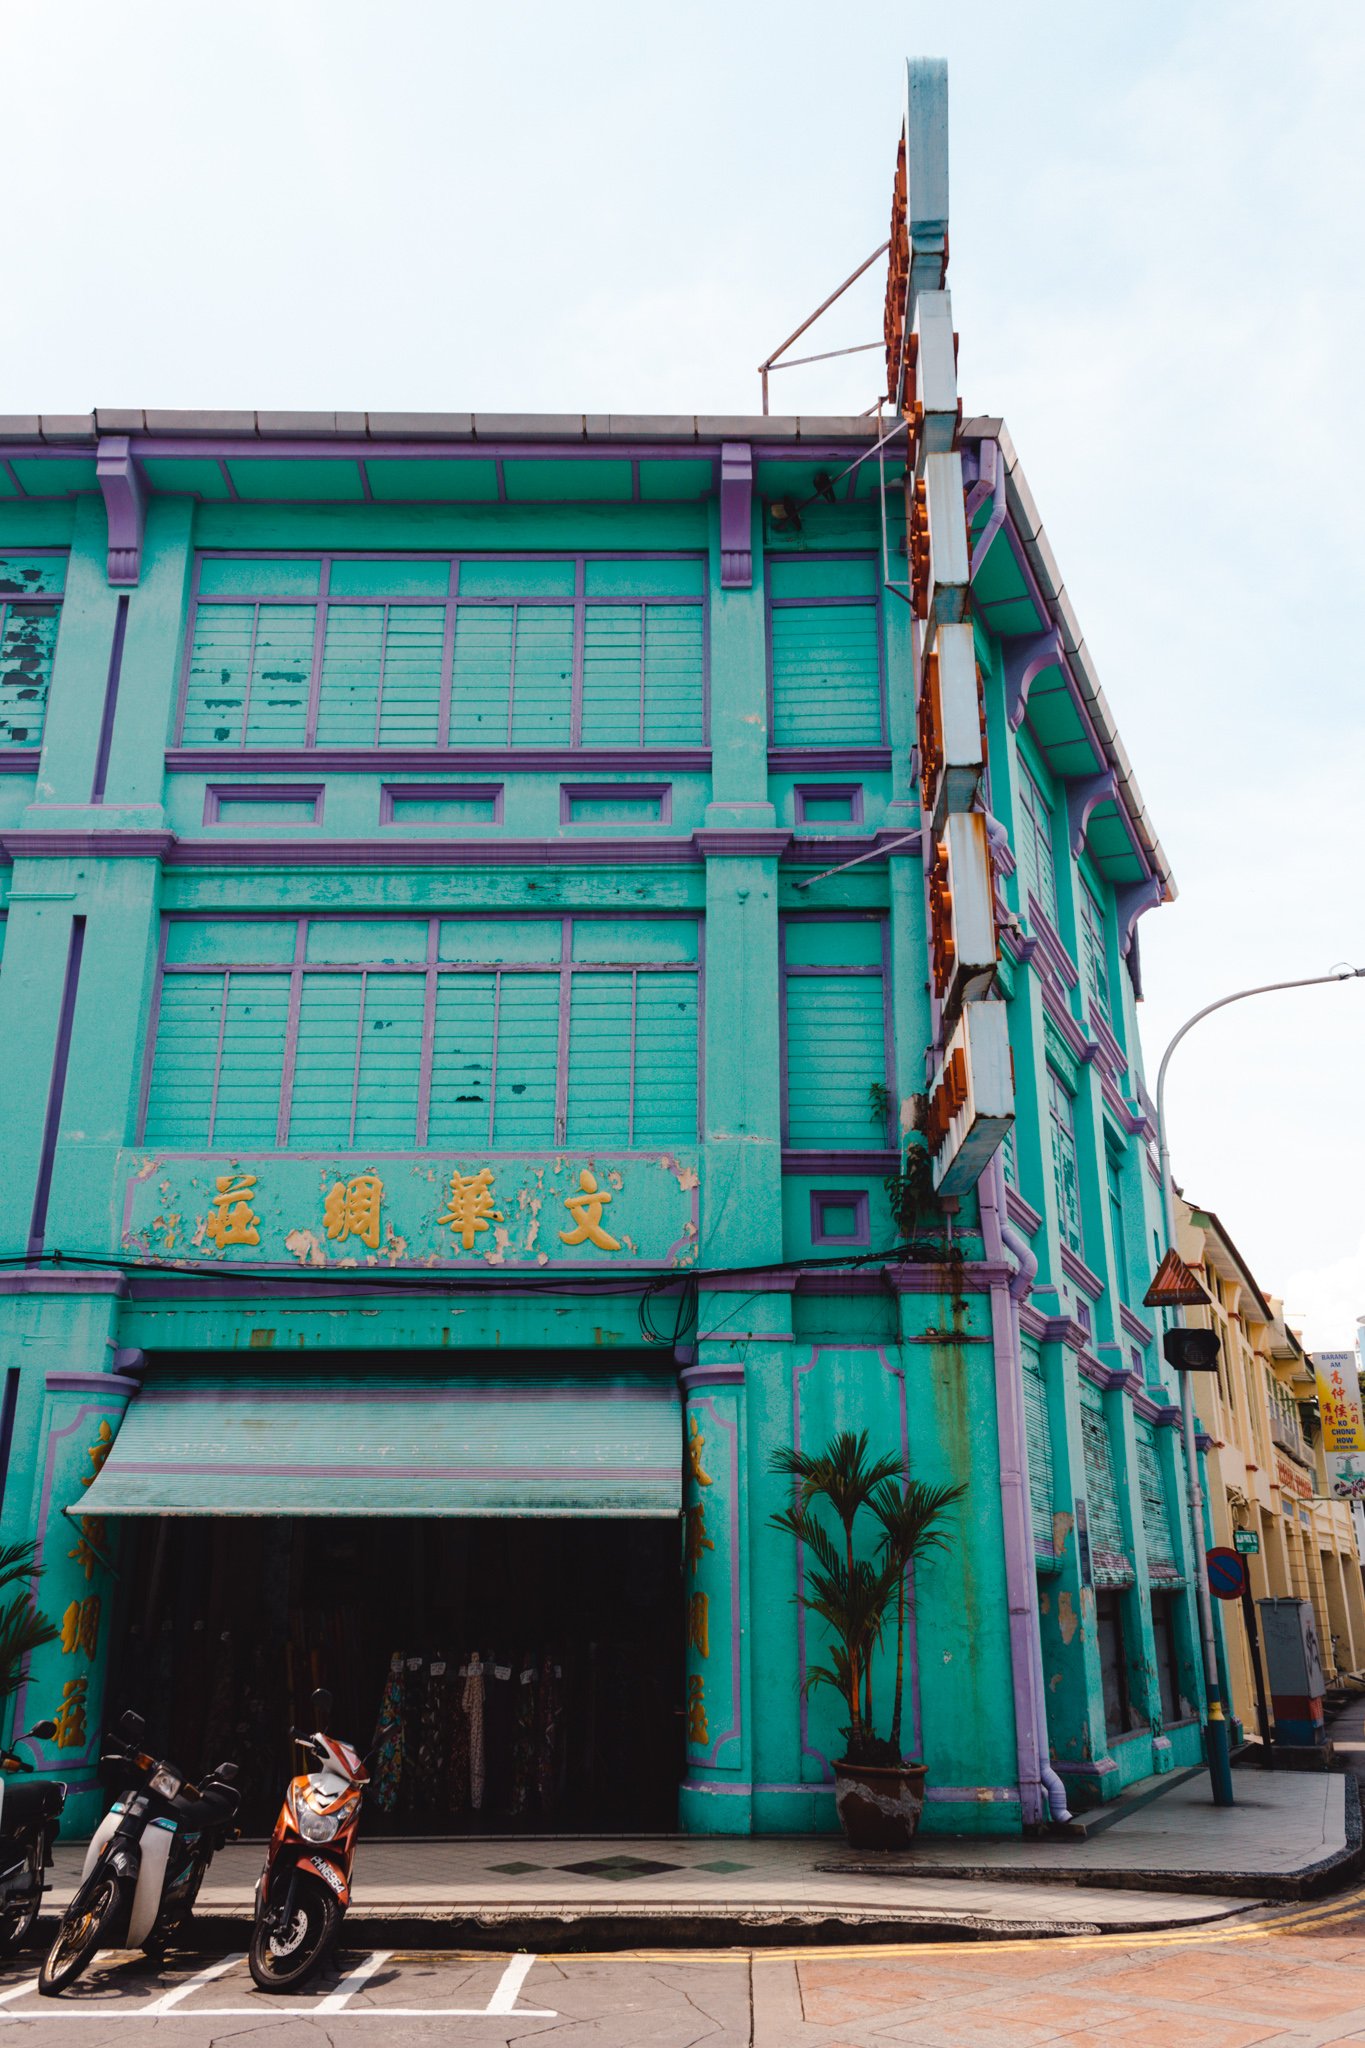 A old colourful building in Penang, Malaysia